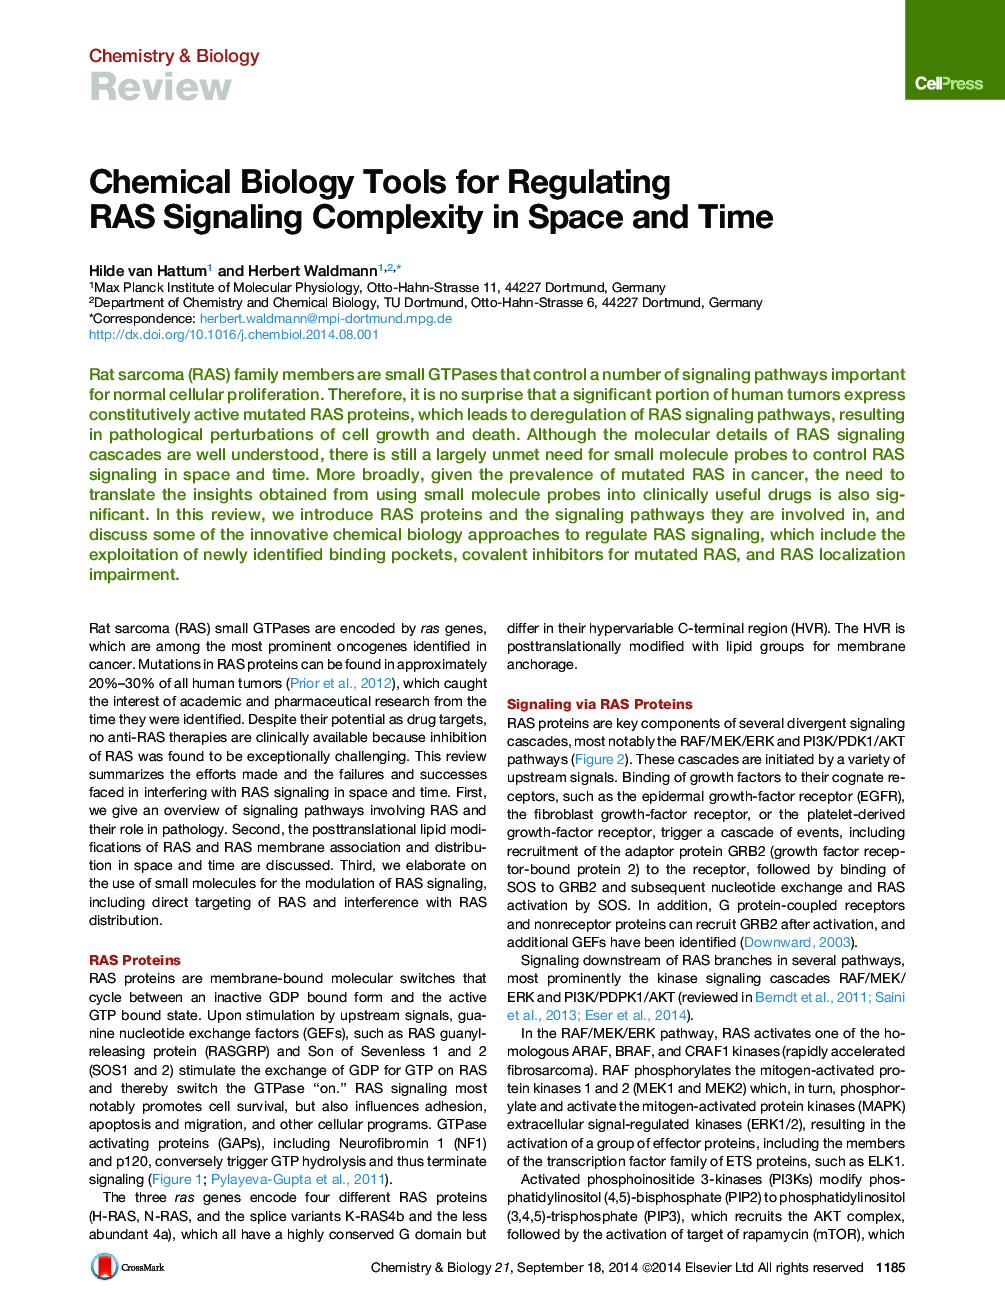 Chemical Biology Tools for Regulating RAS Signaling Complexity in Space and Time